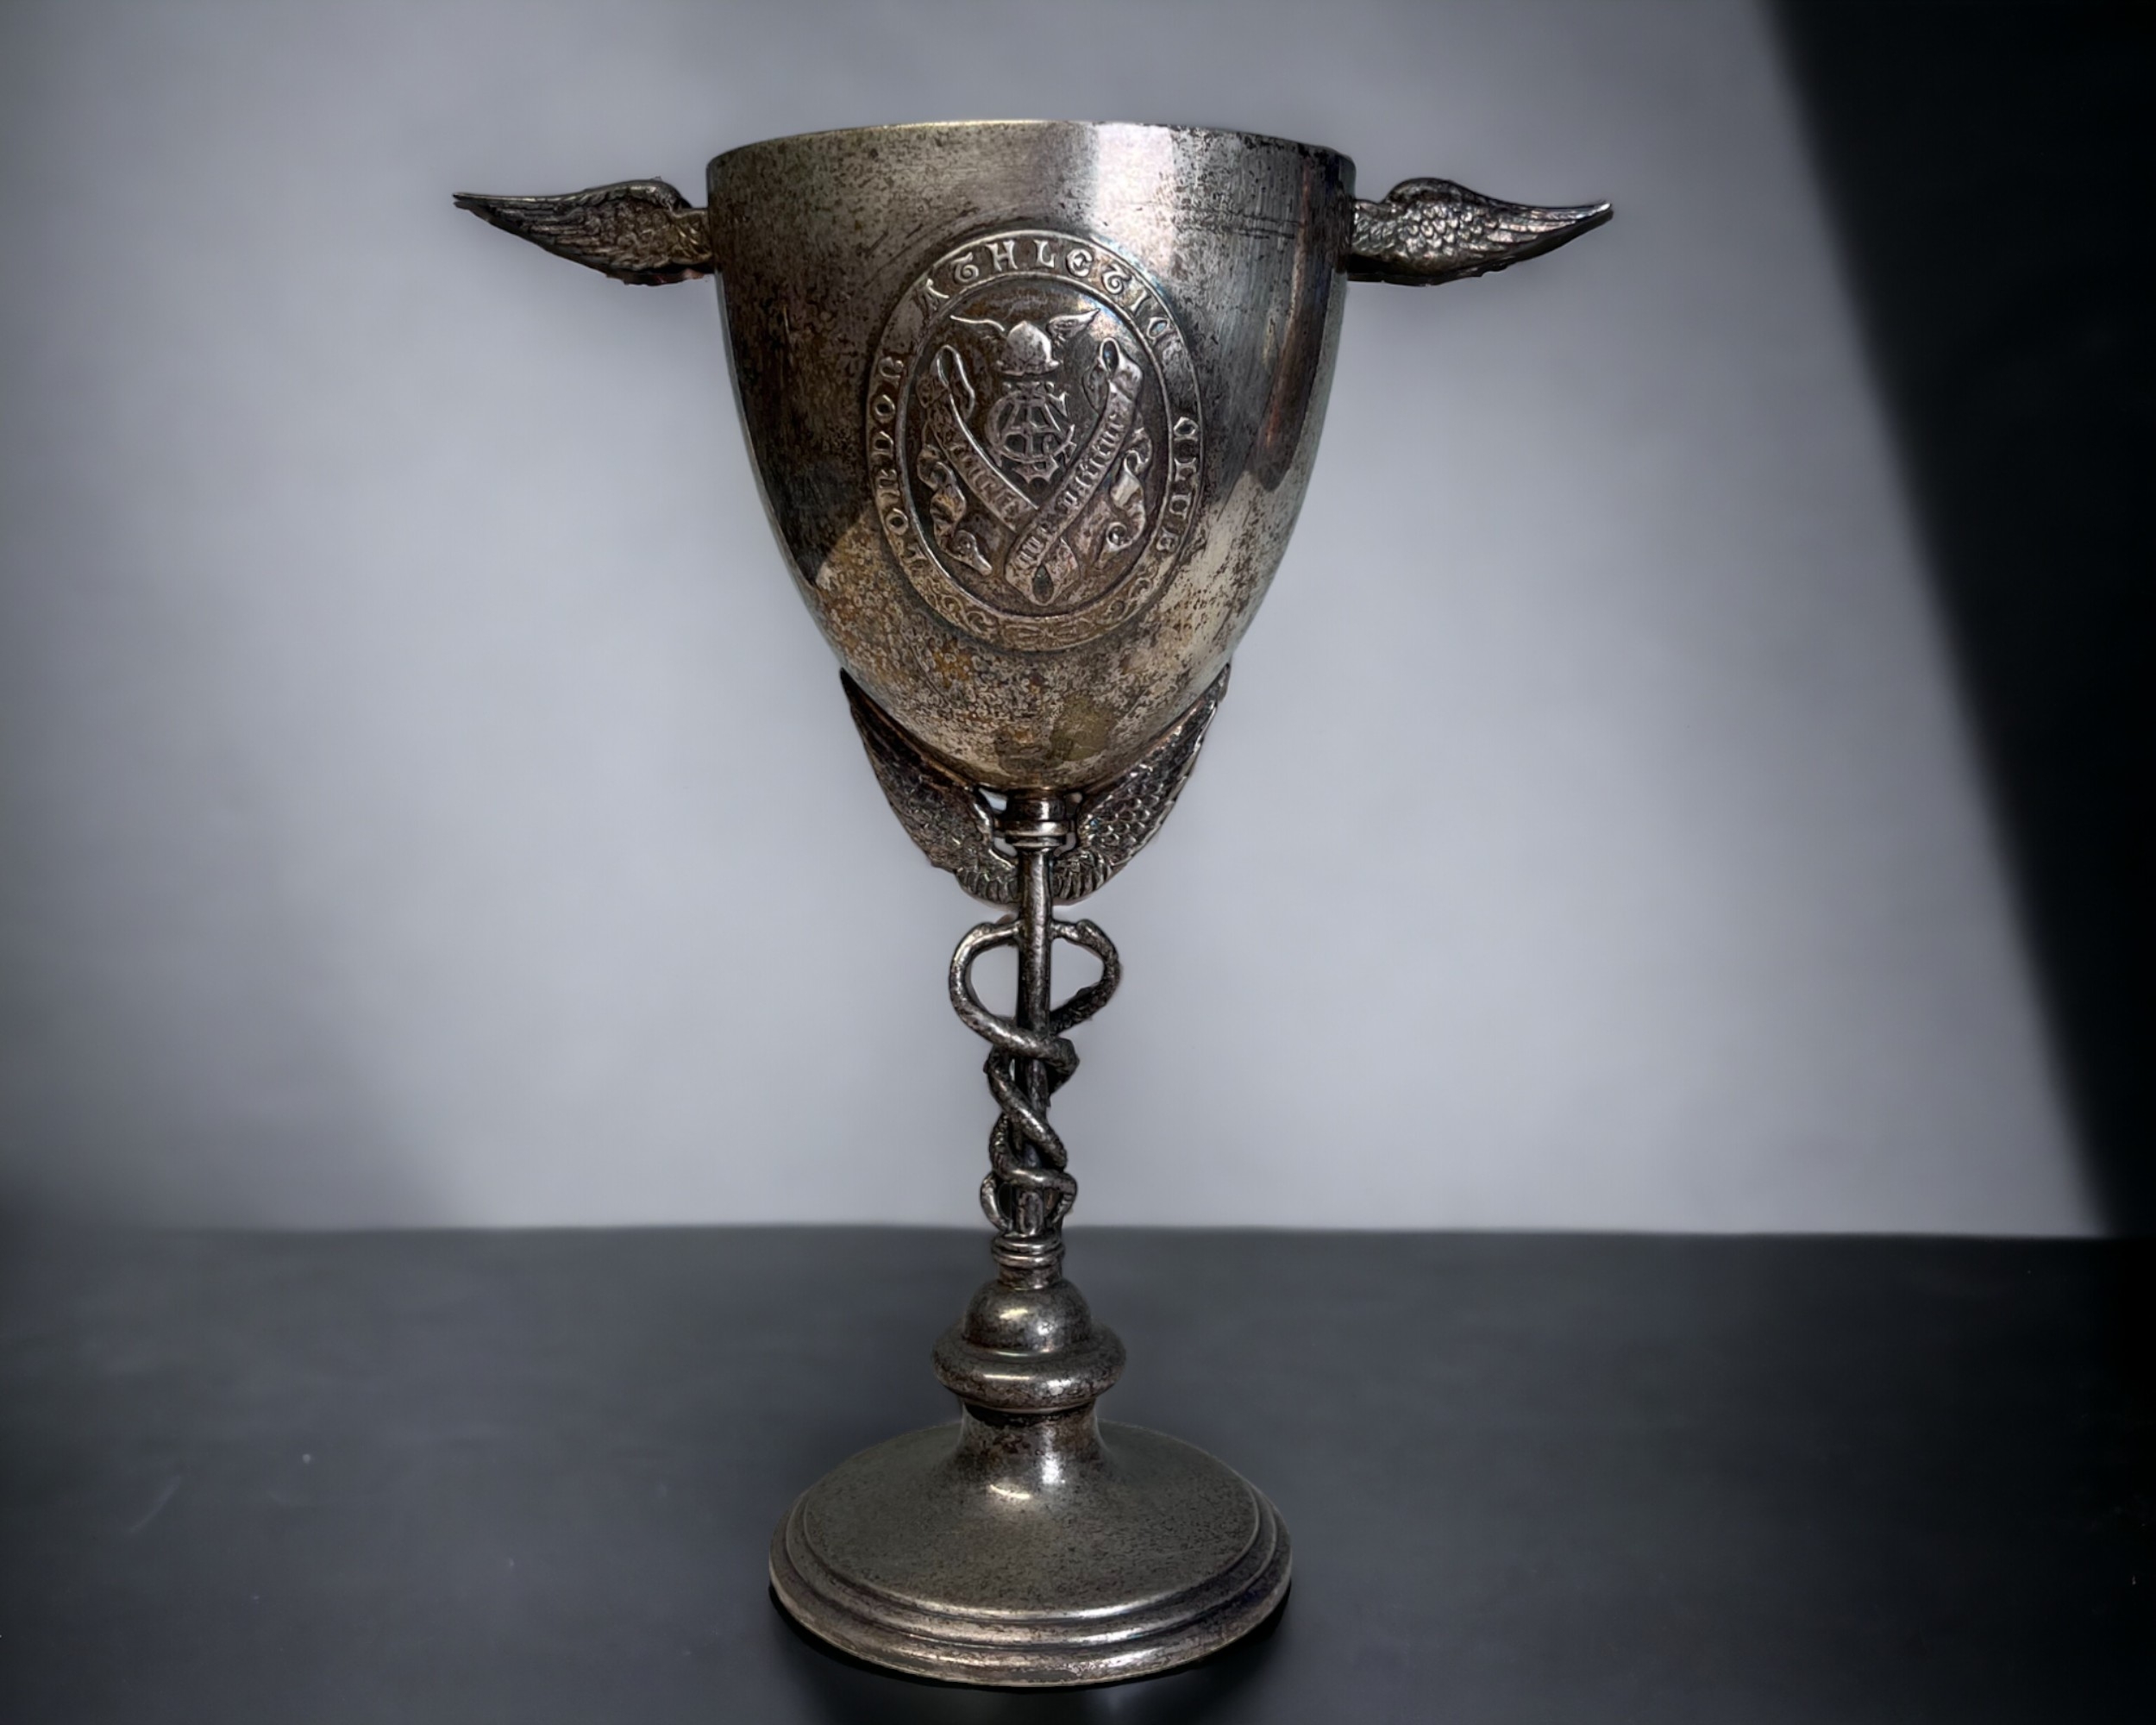 A VICTORIAN SILVER PLATE GOBLET / TROPHY. By Richard Hodd & son, 19th century. Applied cartouche for